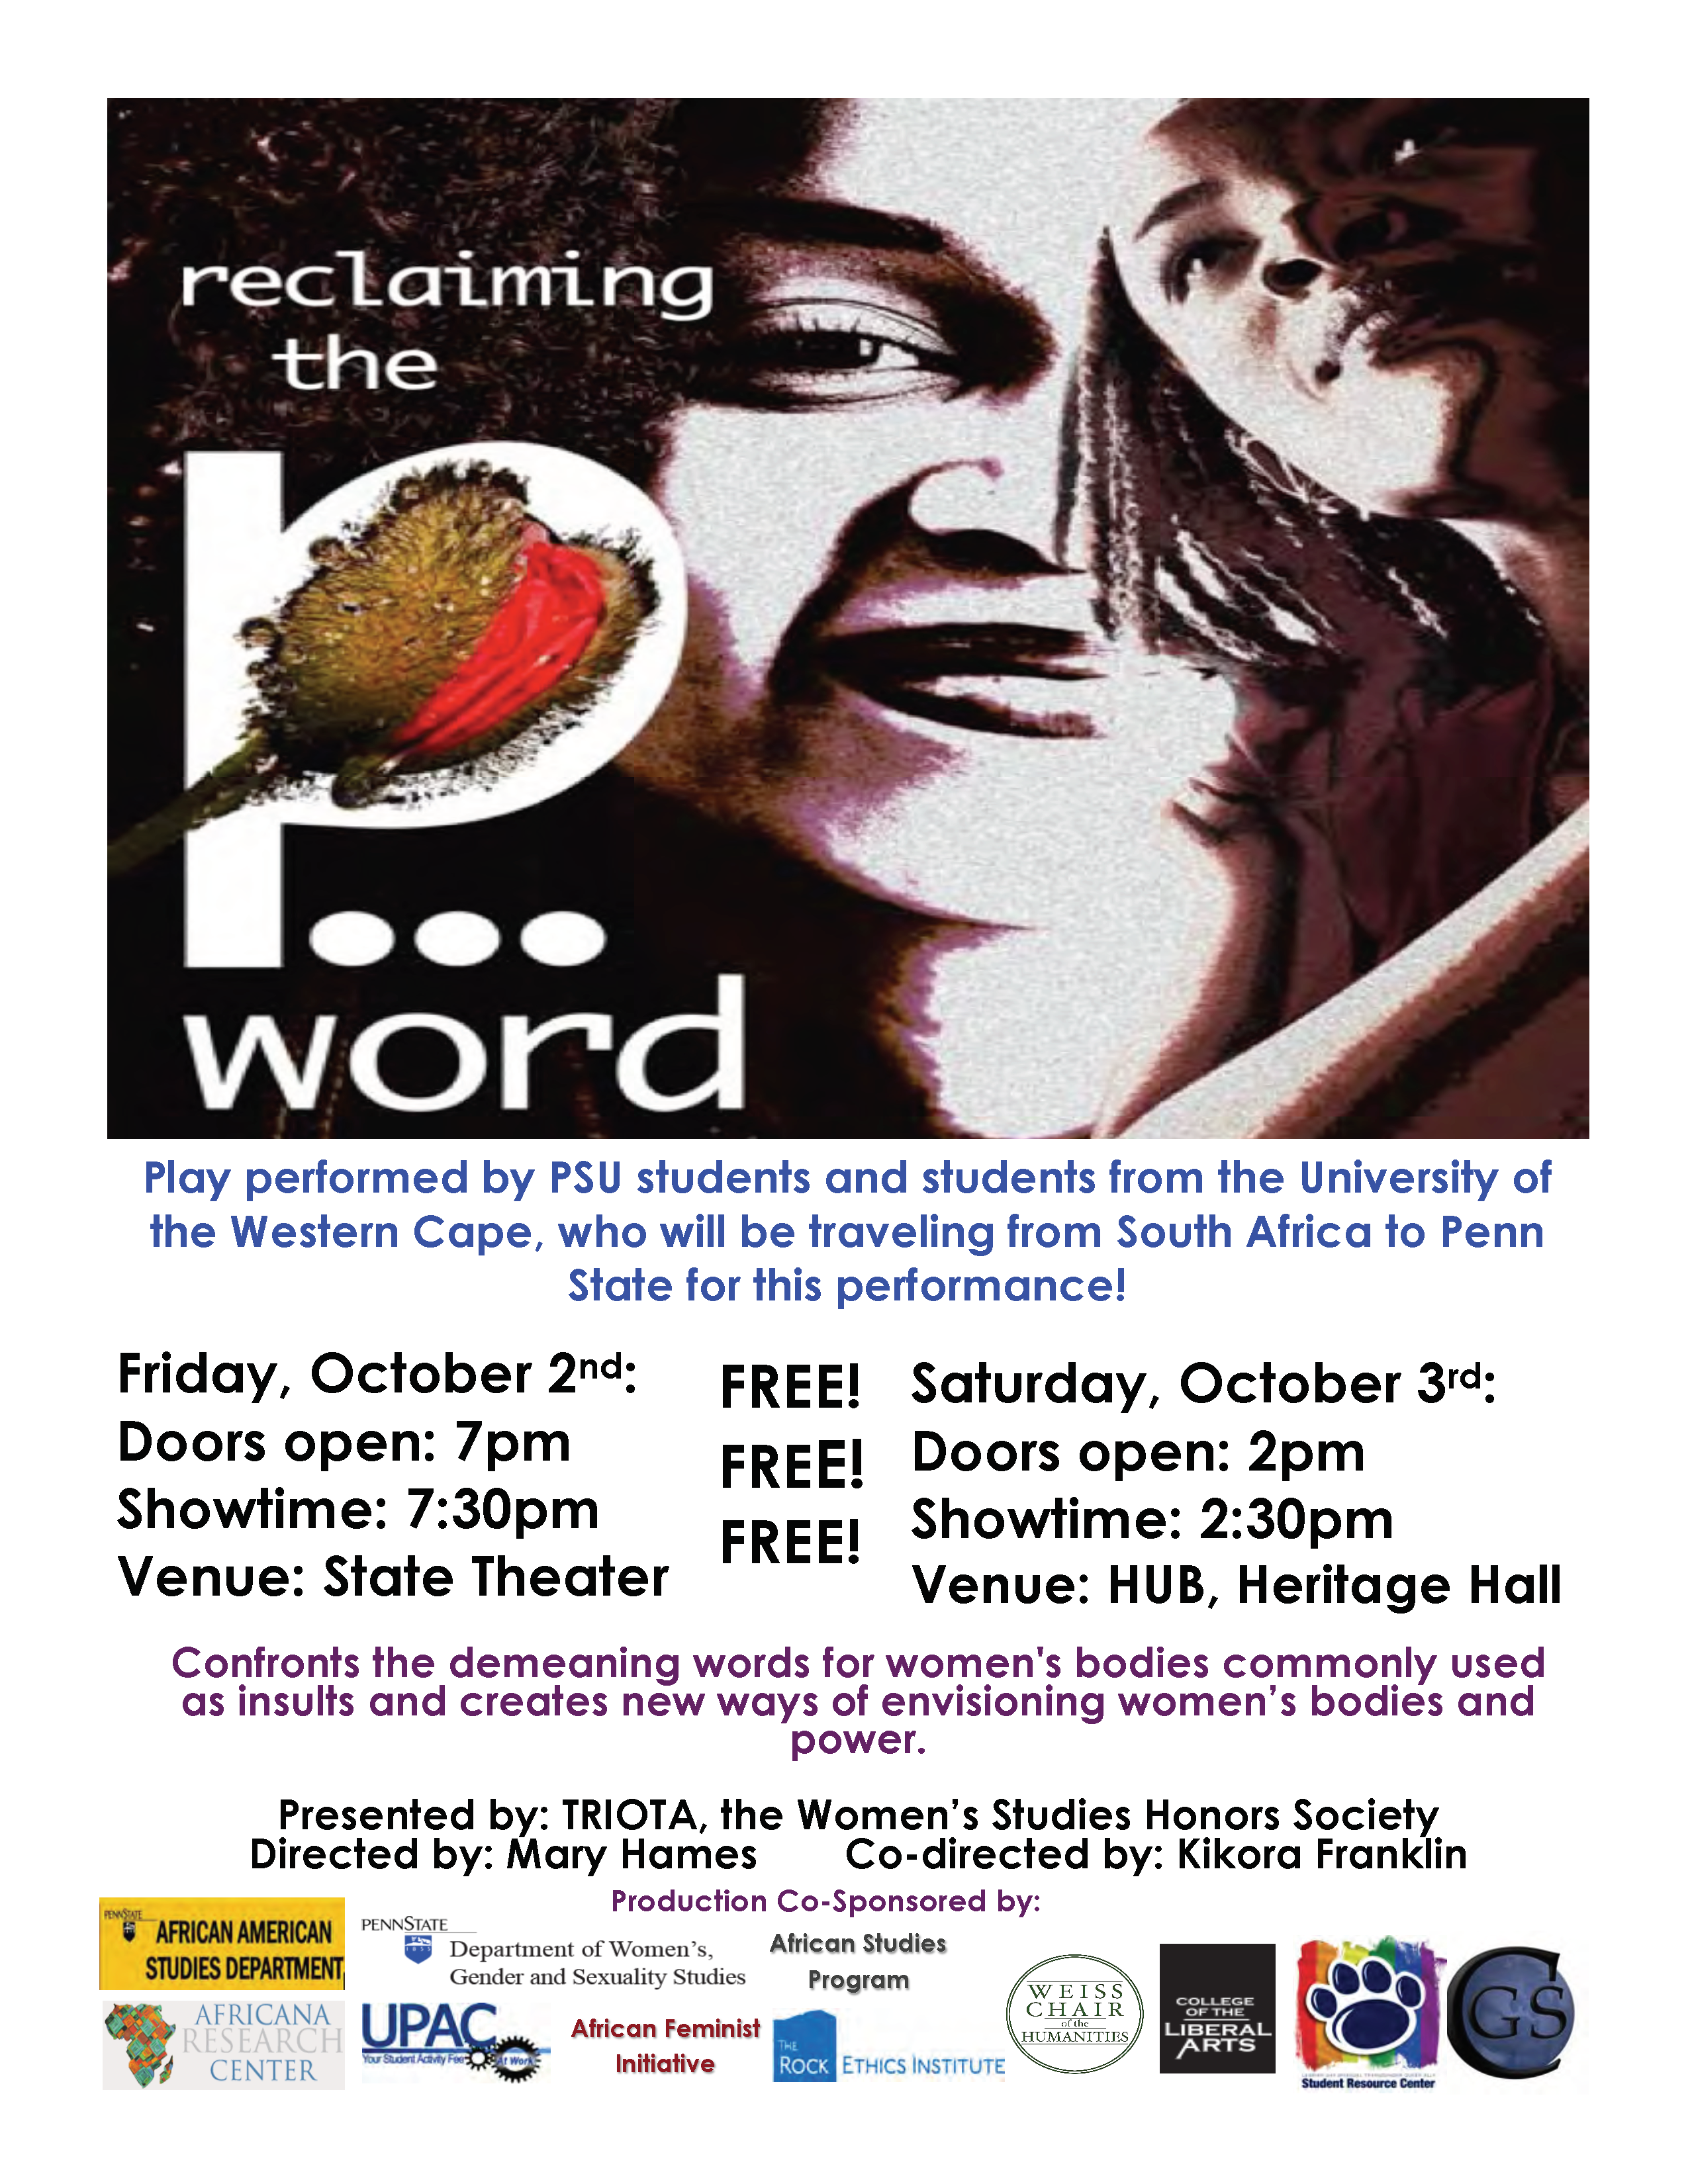 Reclaiming the P Word flyer, Sept 2015[11] smal